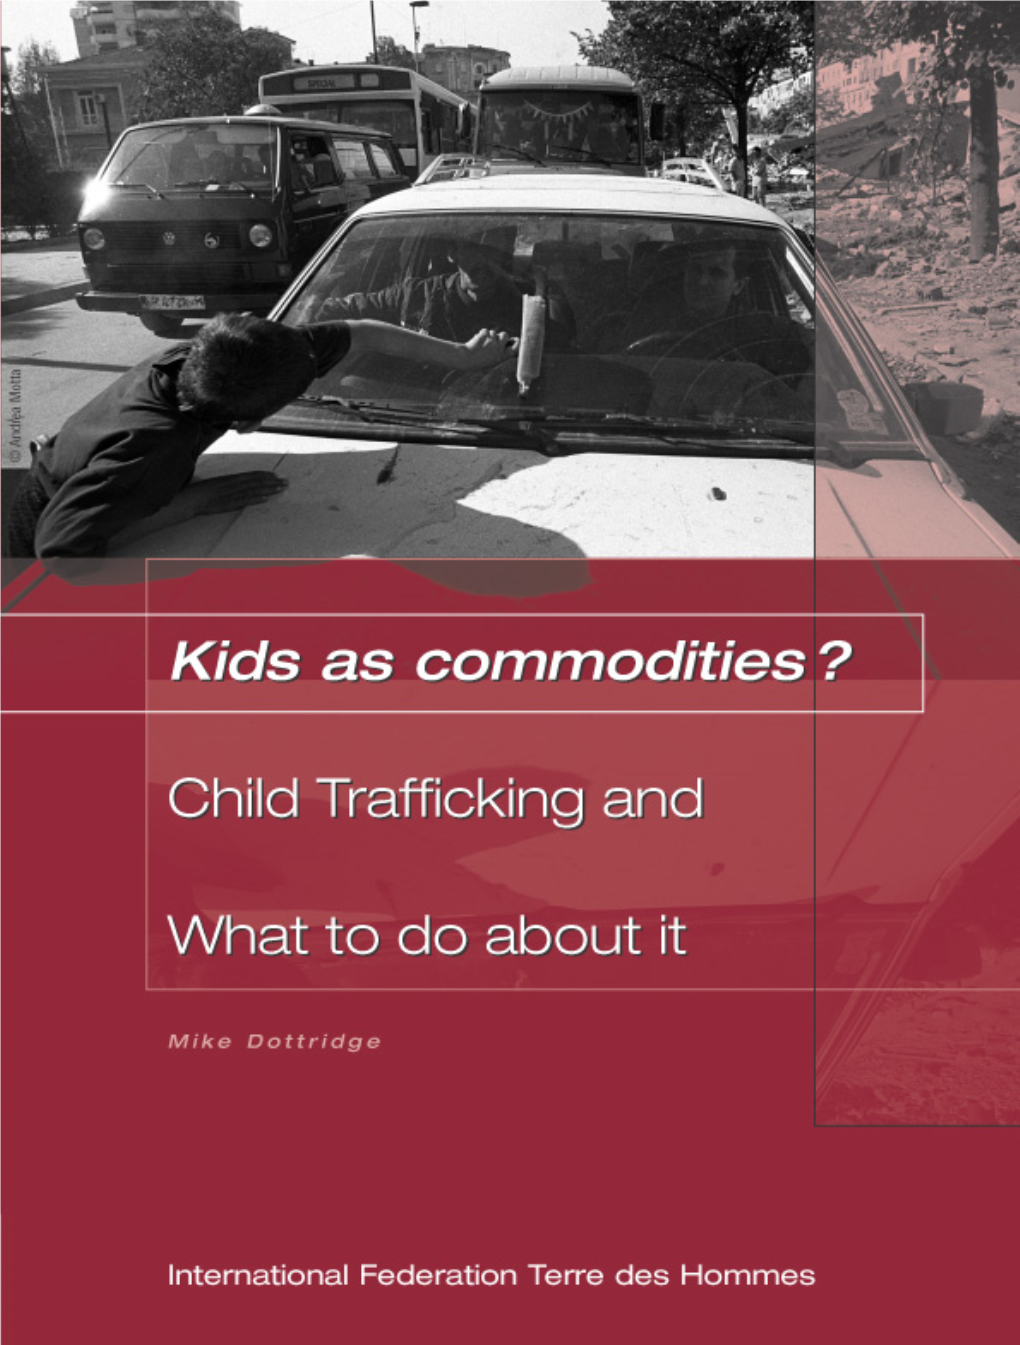 Kids As Commodities? Child Trafficking and What to Do About It